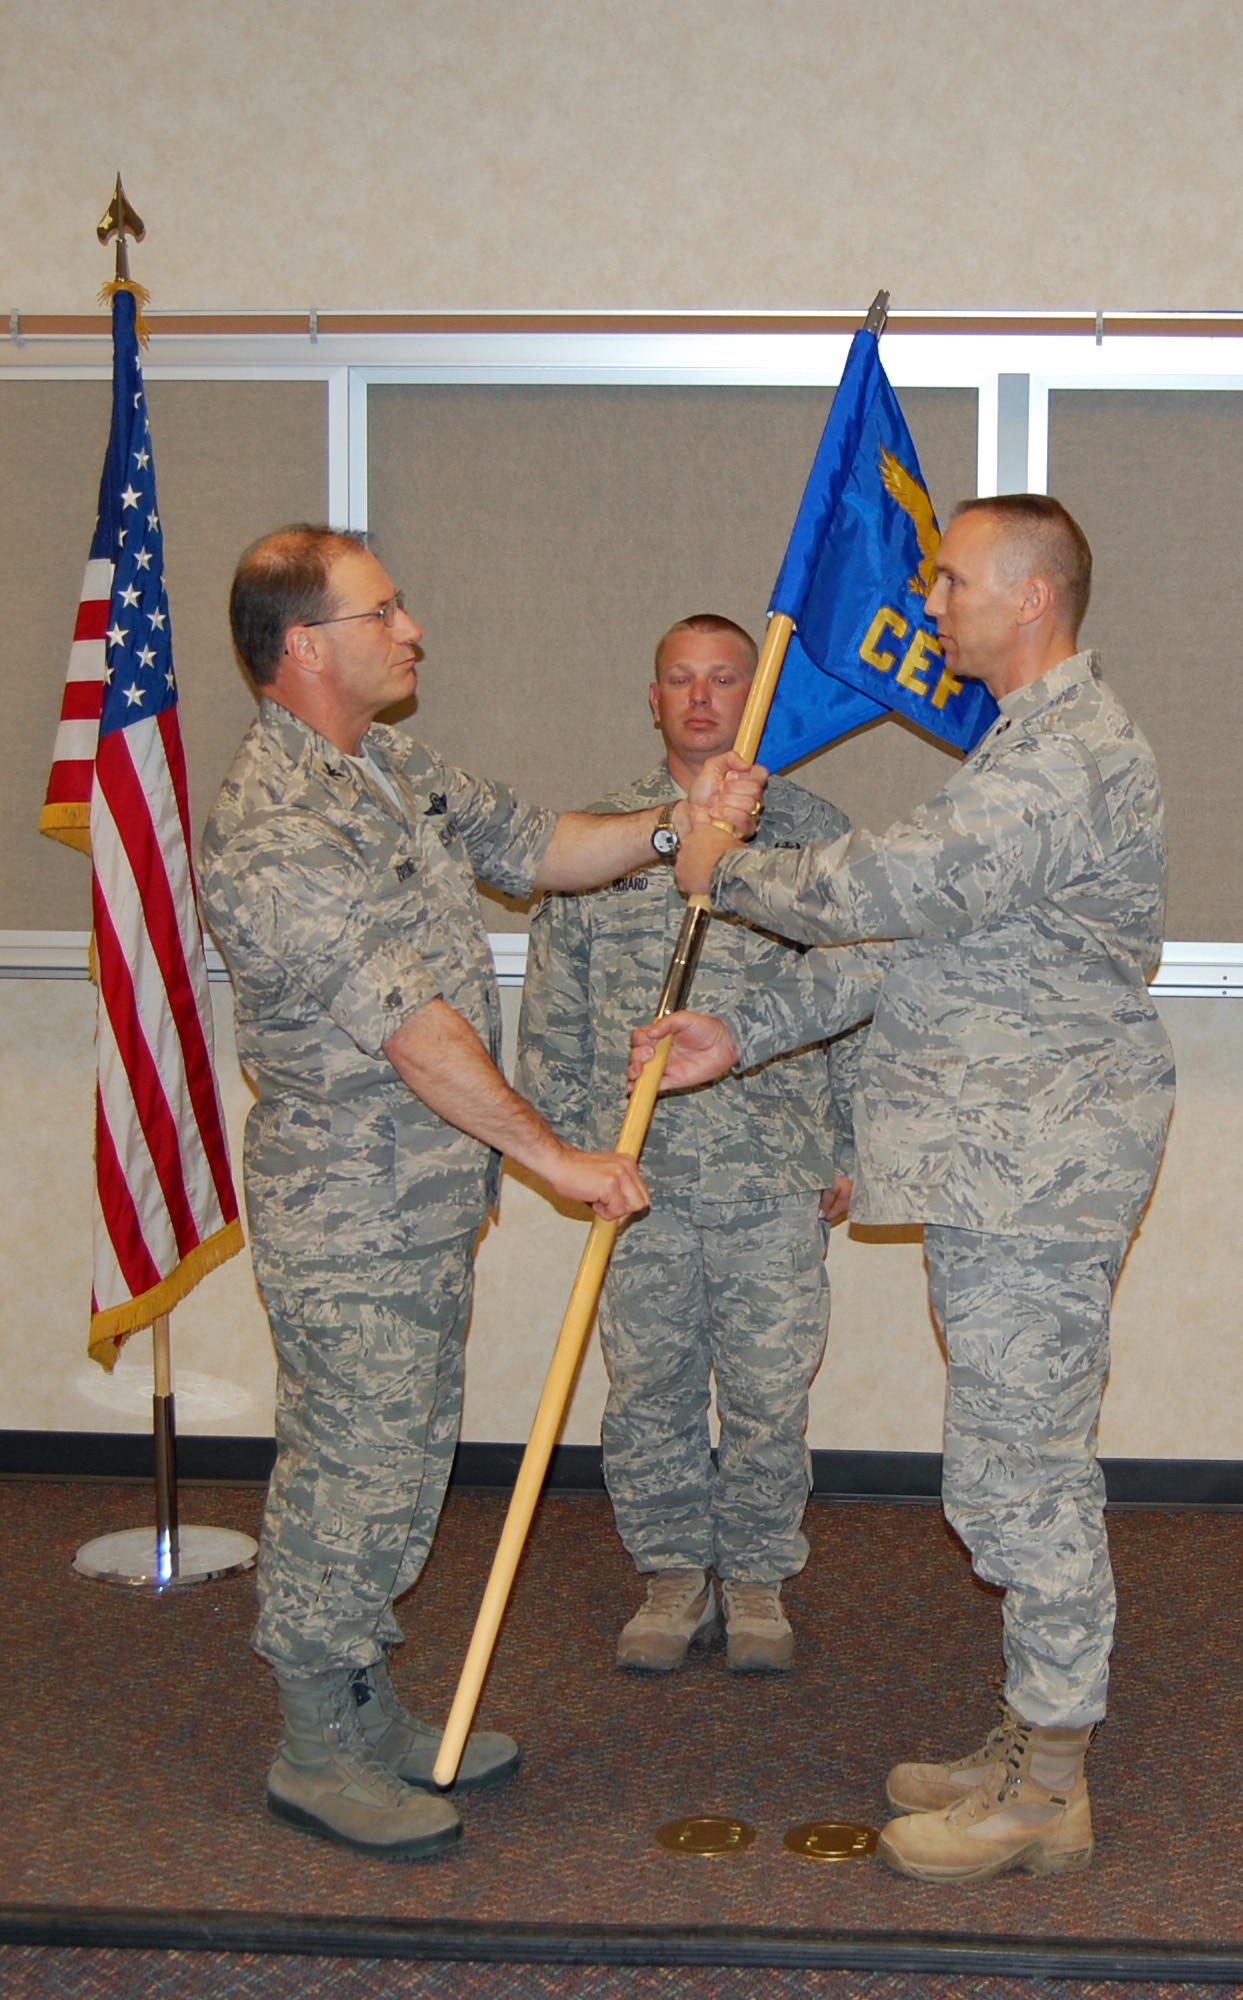 NELLIS AIR FORCE BASE, Nev. - (Right) Capt. Daniel Tufts, 926th Civil Engineer Flight commander, receives the guideon from Col. Herman Brunke, Jr., 926th Group commander, during an appointment of command ceremony here April 14. (U.S. Air Force photo/Capt. Jessica Martin)